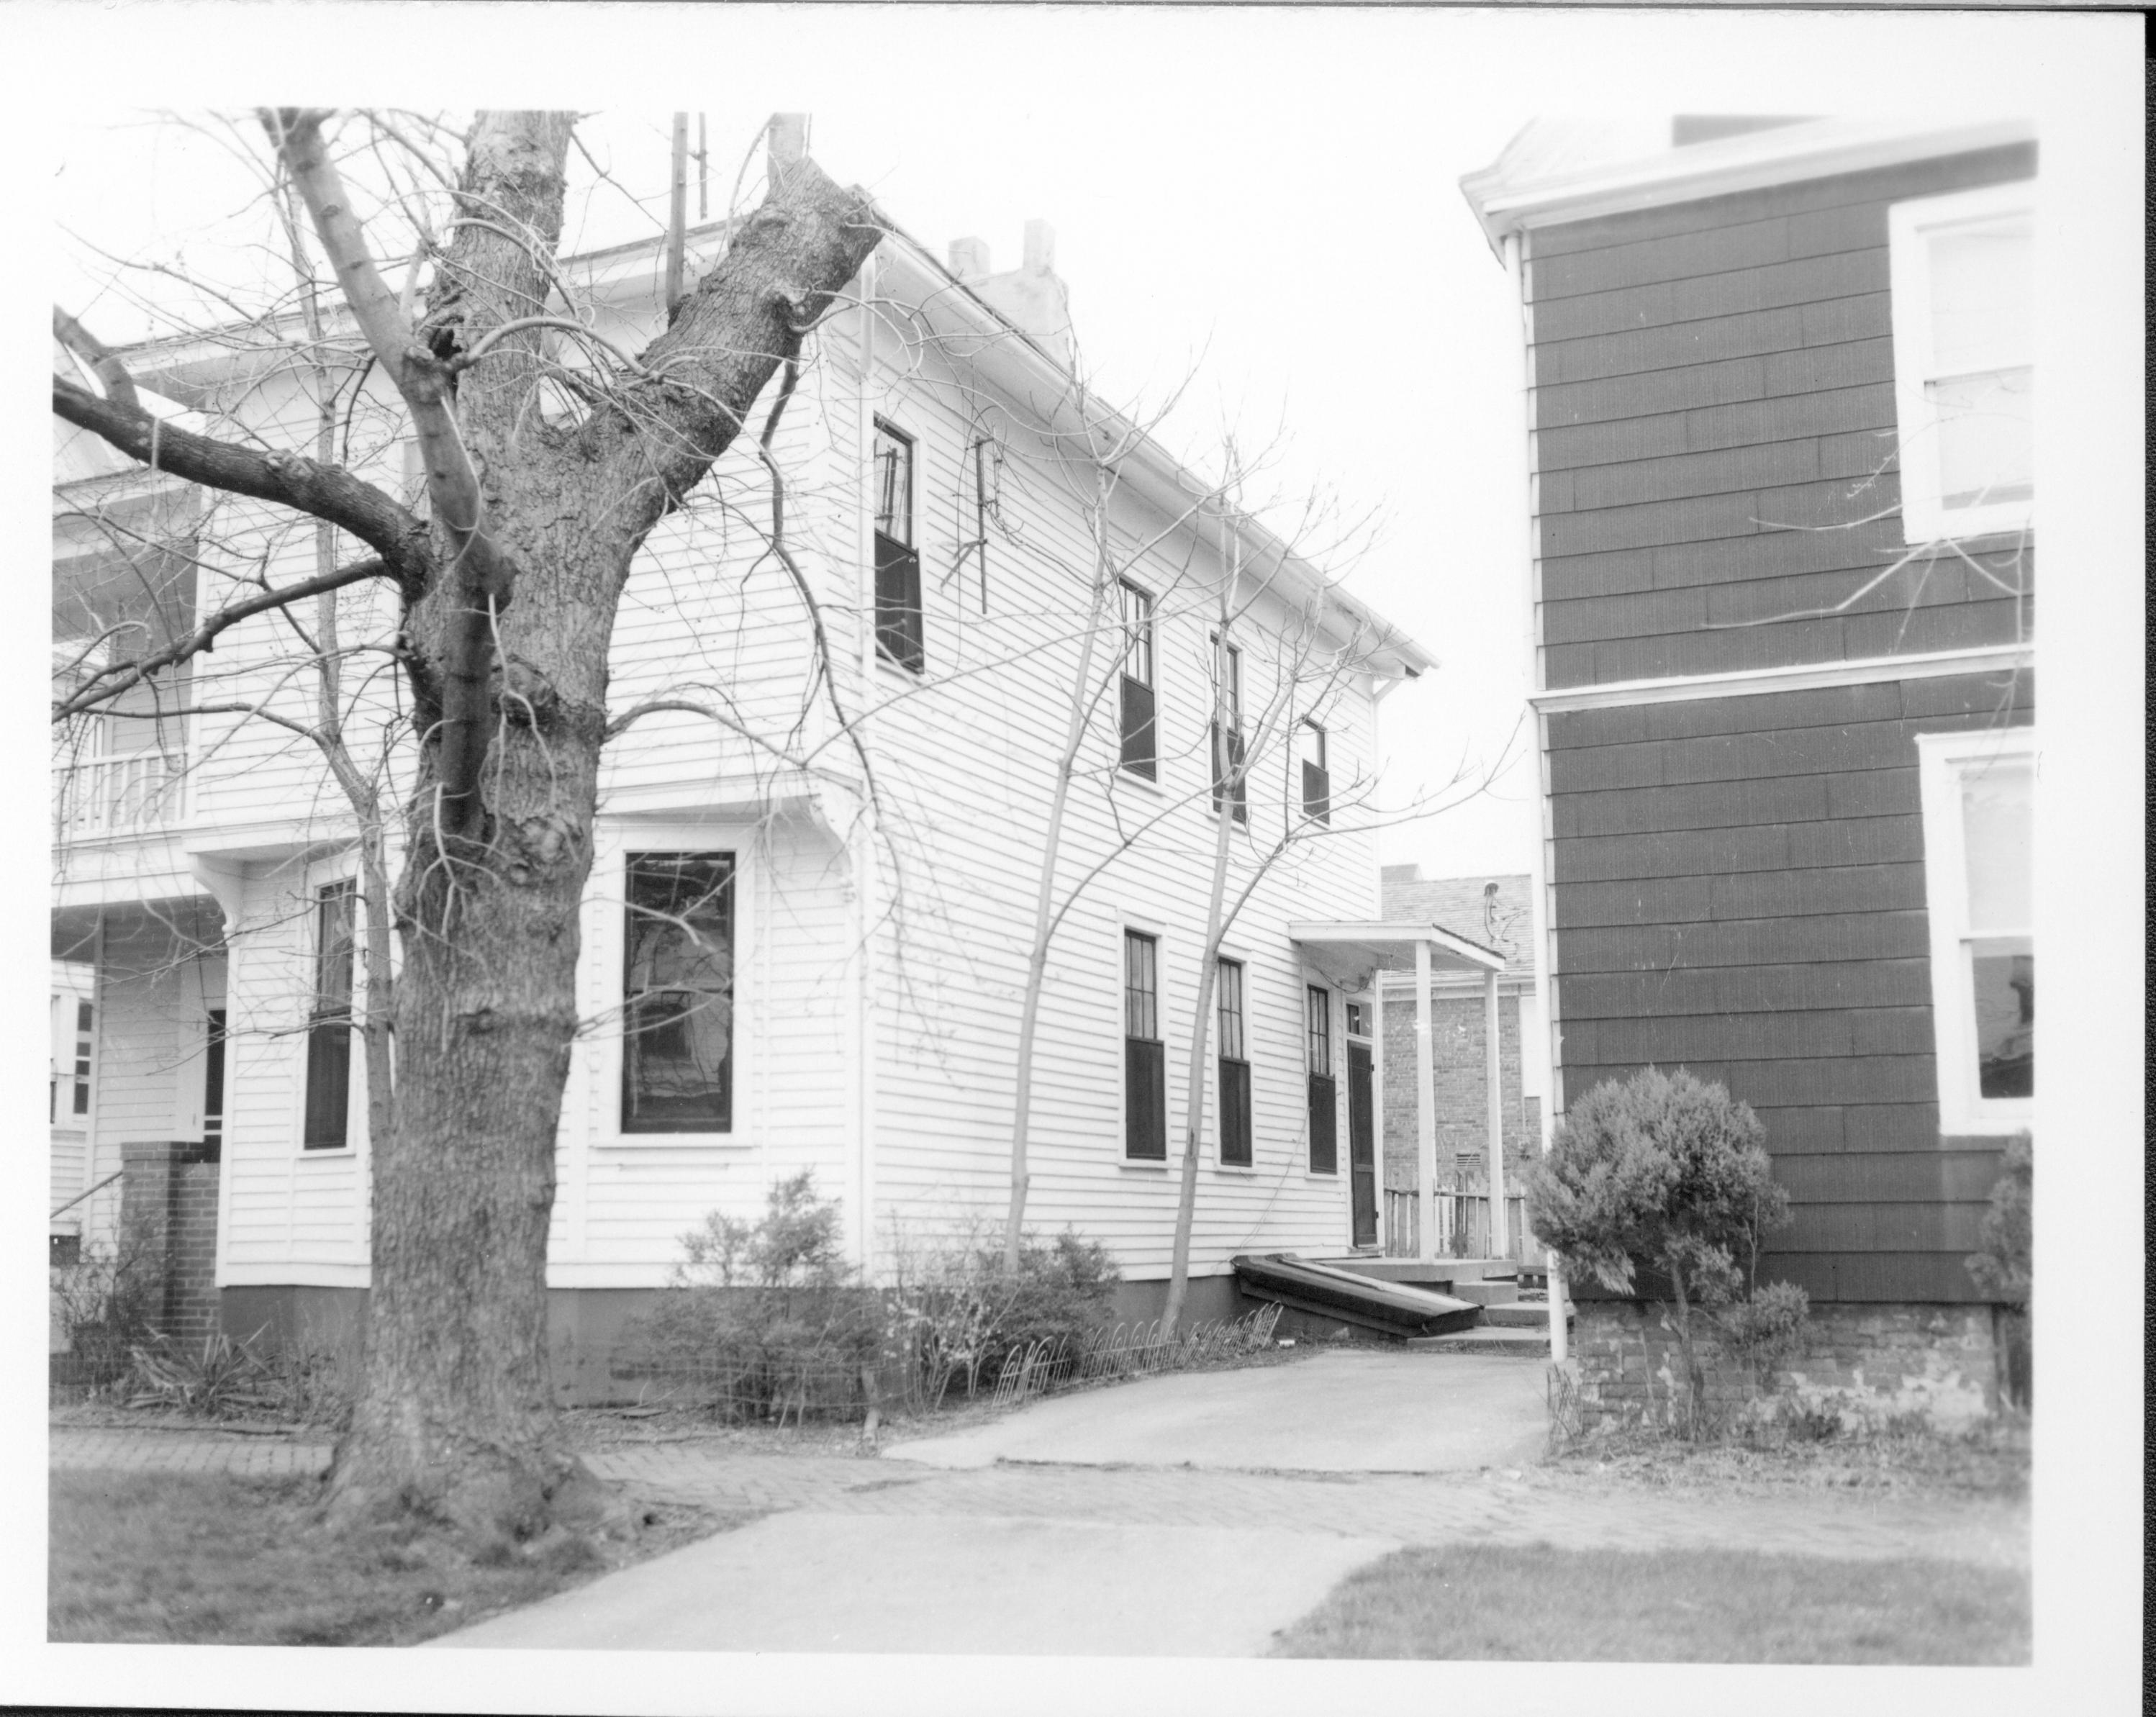 Duplex apartment owned by William Sheeham, Block 7, Lot 8 along Jackson Street.  House on right owned by William Hermes. Area is now Visitor Center.  Looking Northwest from Jackson Street. Sheeham, Hermes, Jackson Street, Visitor Center